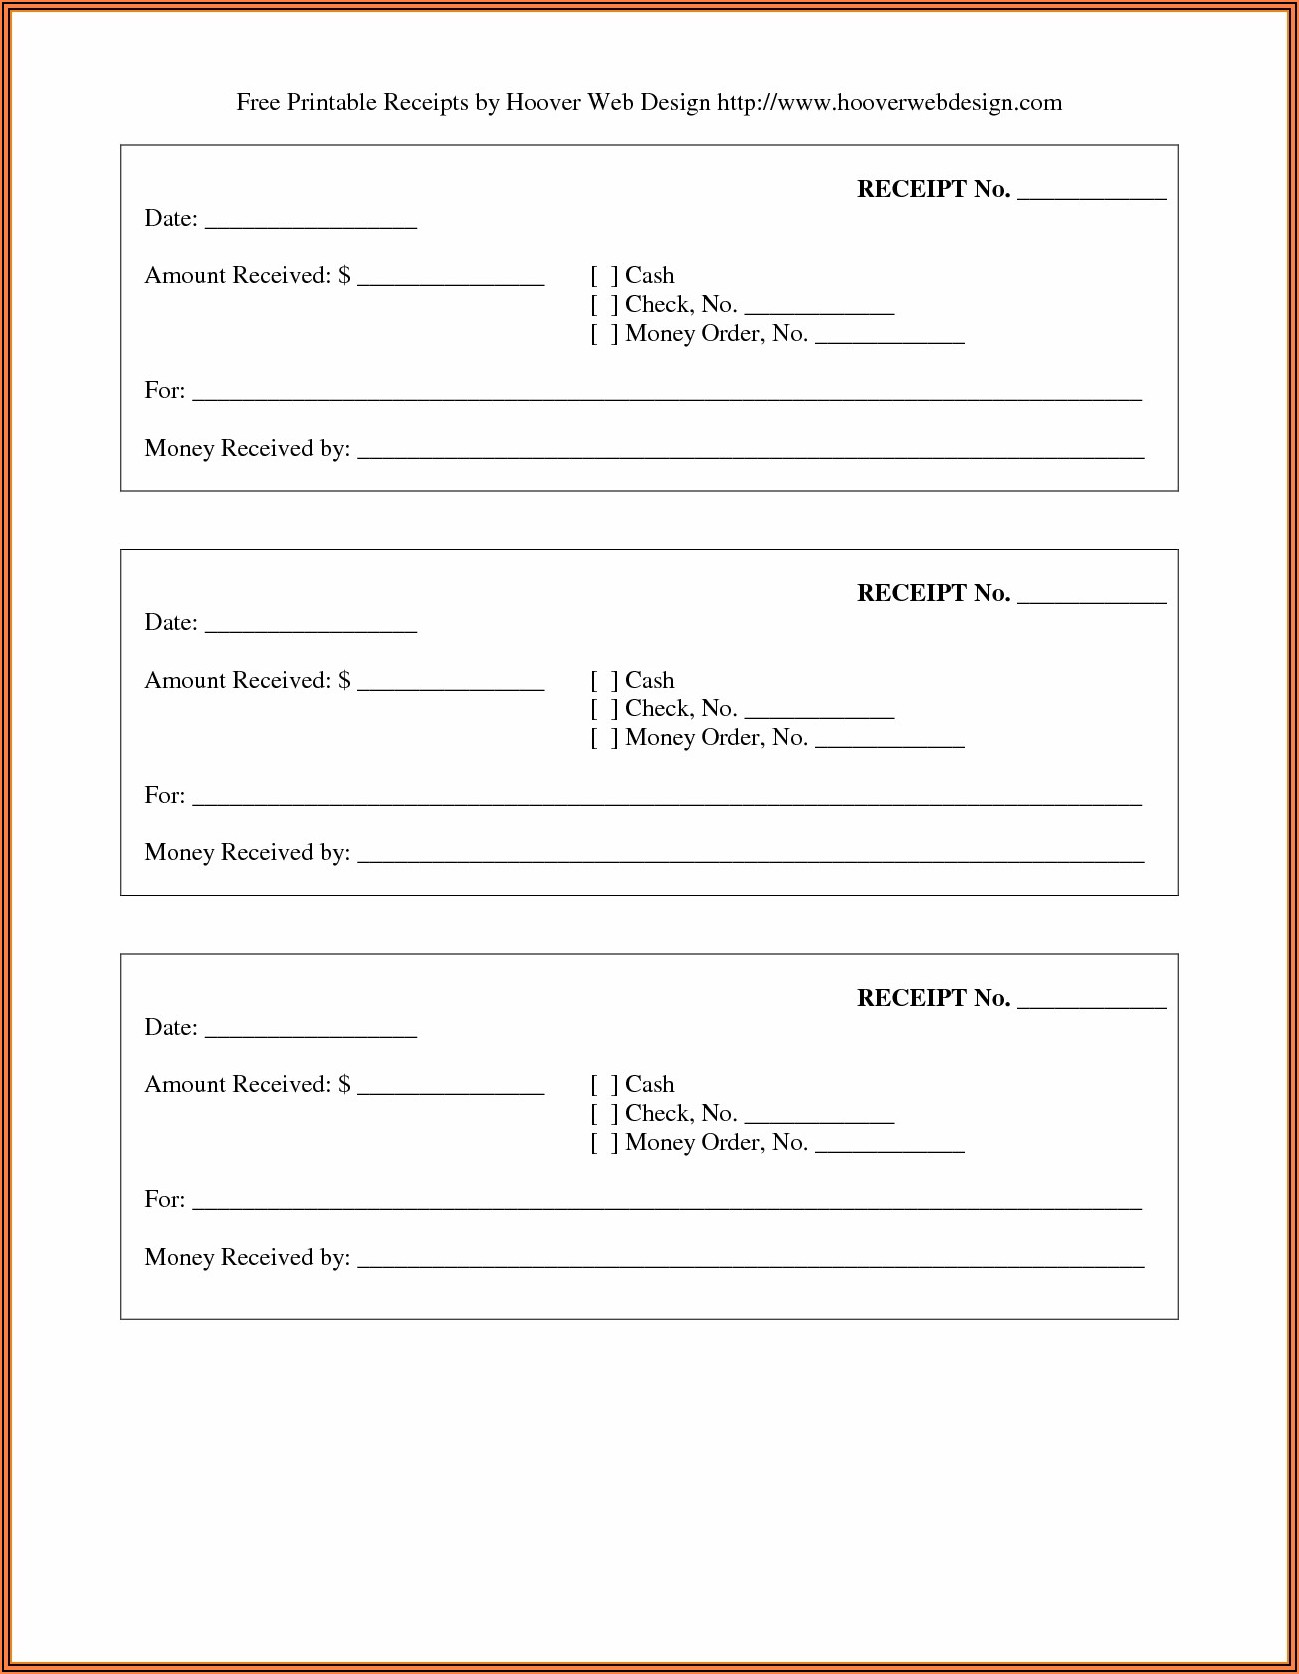 Download Printable Receipt Forms For Free